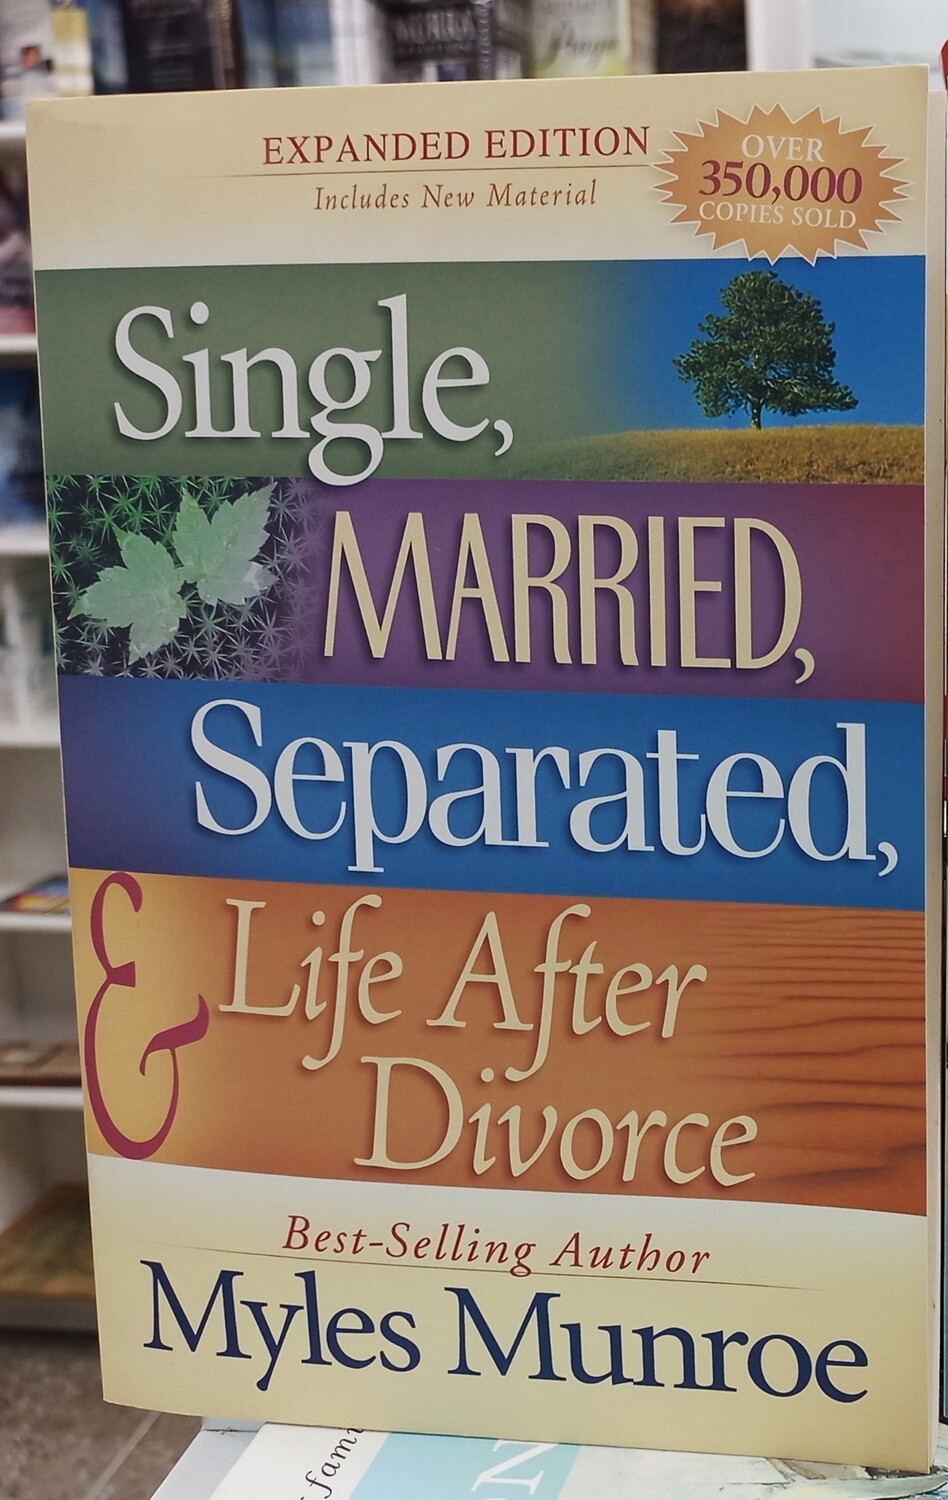 Single, Married, Separated and Life after Divorce by Myles Munroe